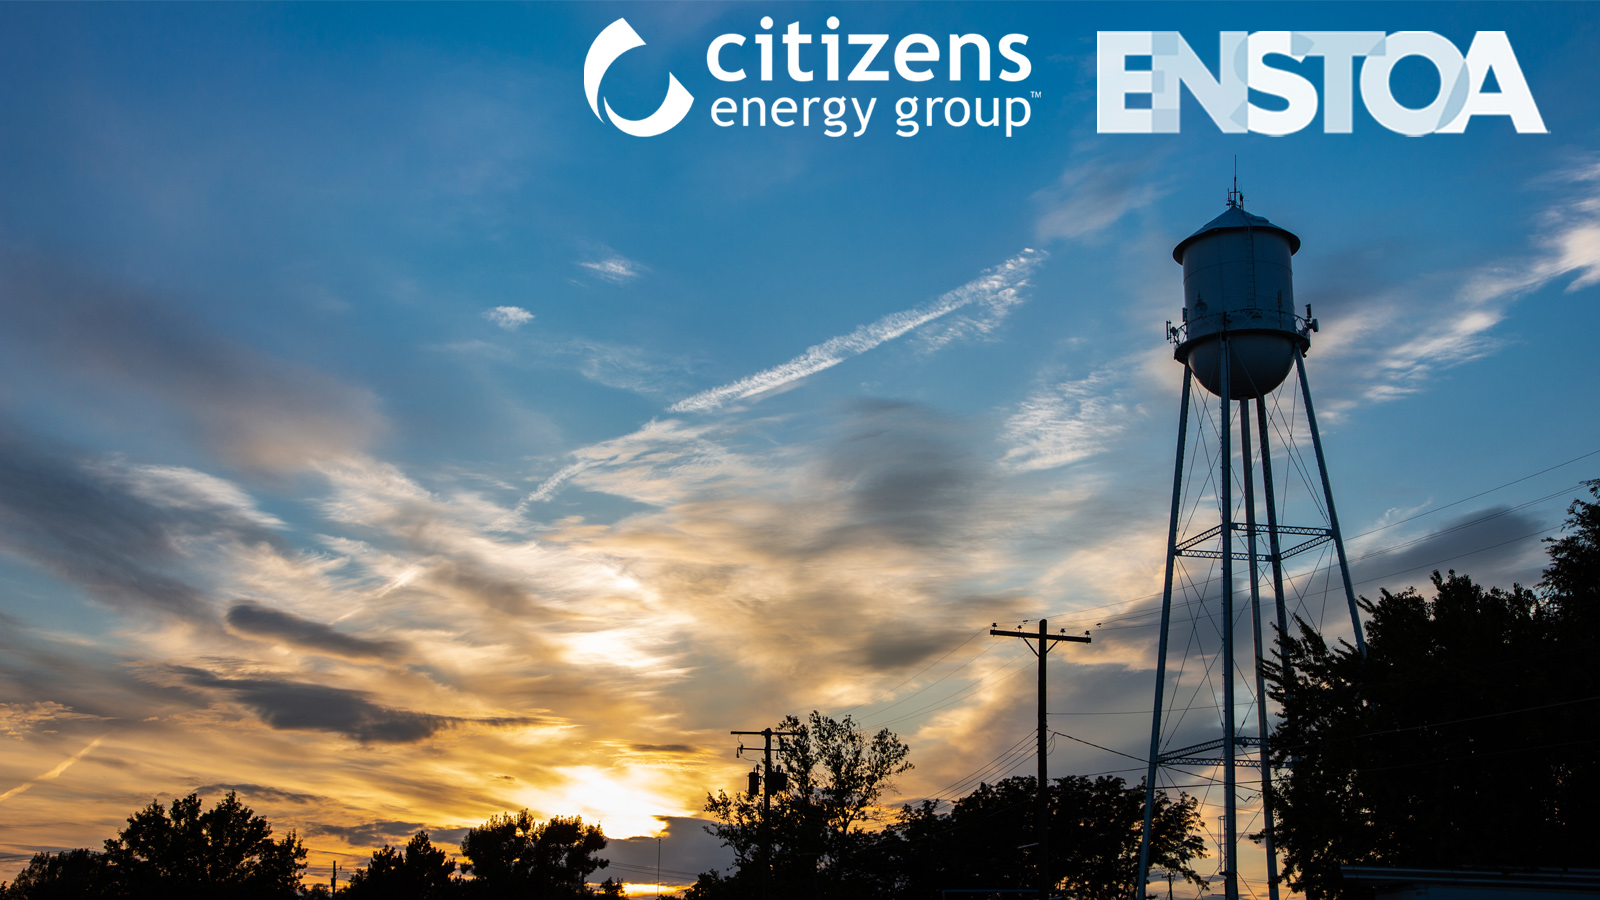 Citizens Energy Group Taps Enstoa for Enhancements to Project Management System